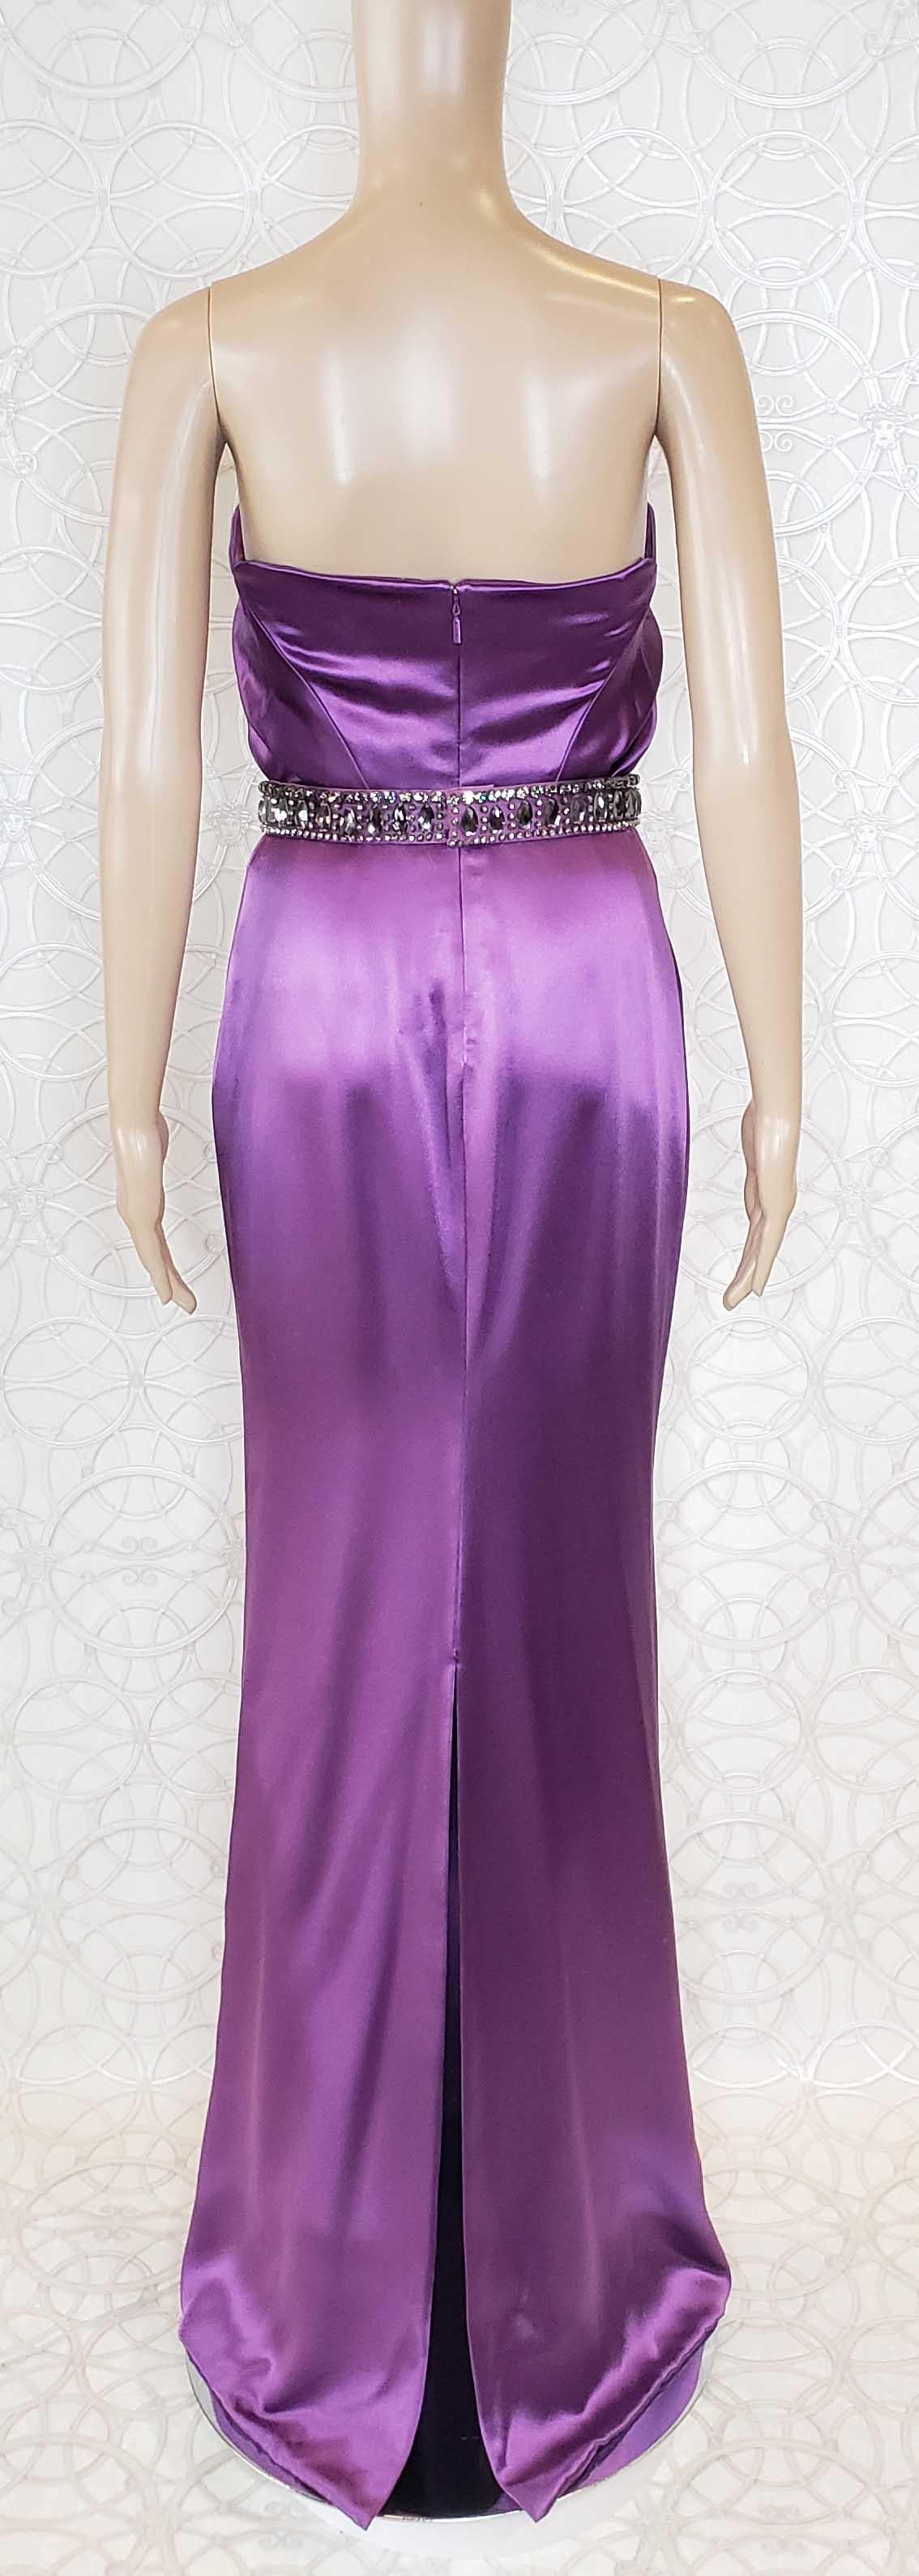 Women's NEW VERSACE EMBELLISHED AMETHYST STRAPLESS GOWN DRESS EVA WORE IN Paris! 38 - 2 For Sale